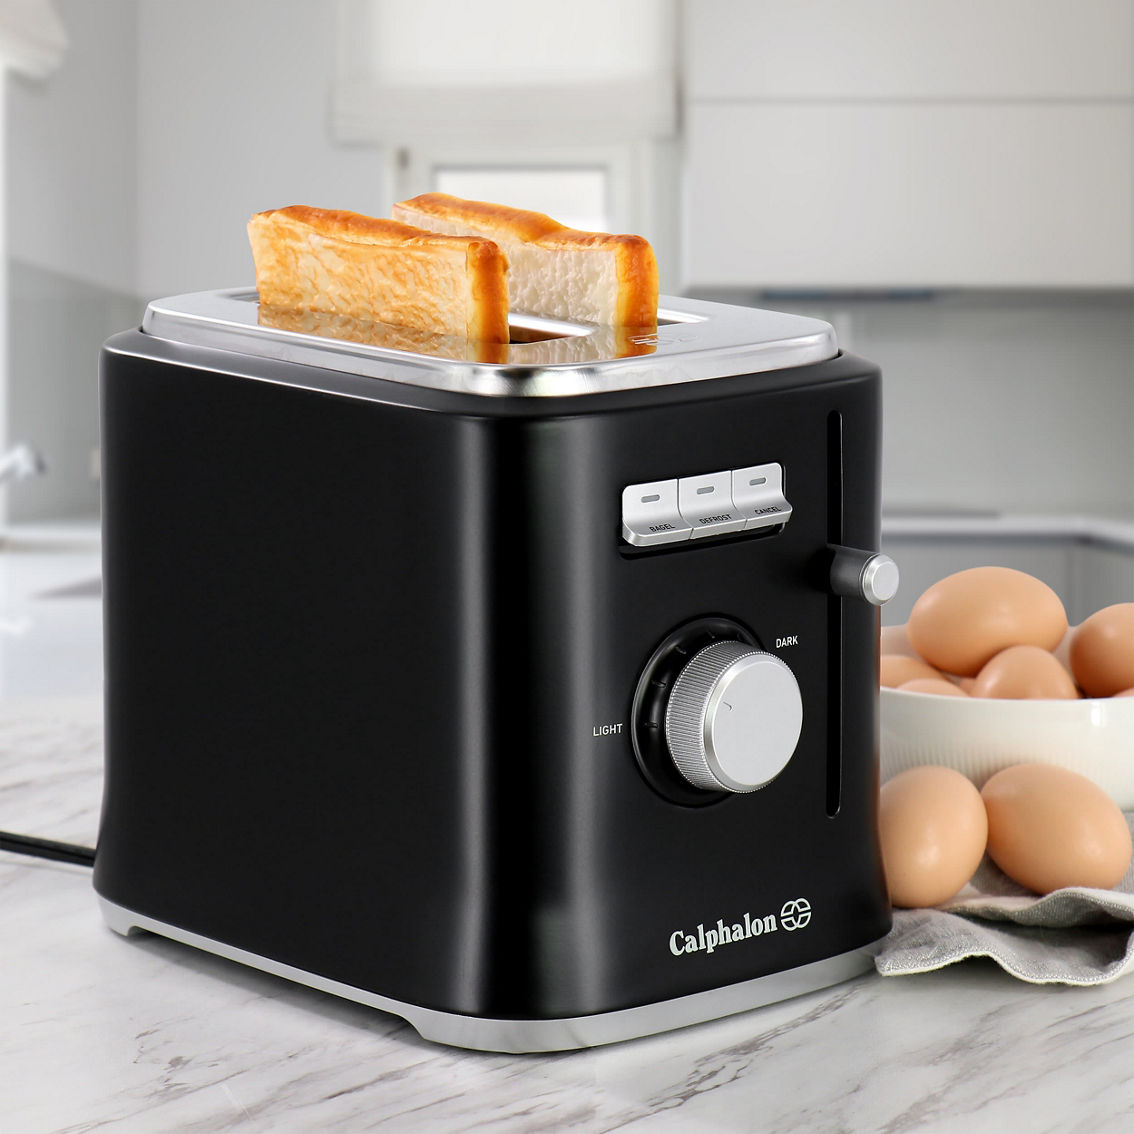 Calphalon Precision Control 2 Slice Toaster with 6 Shade Settings in - Image 5 of 5